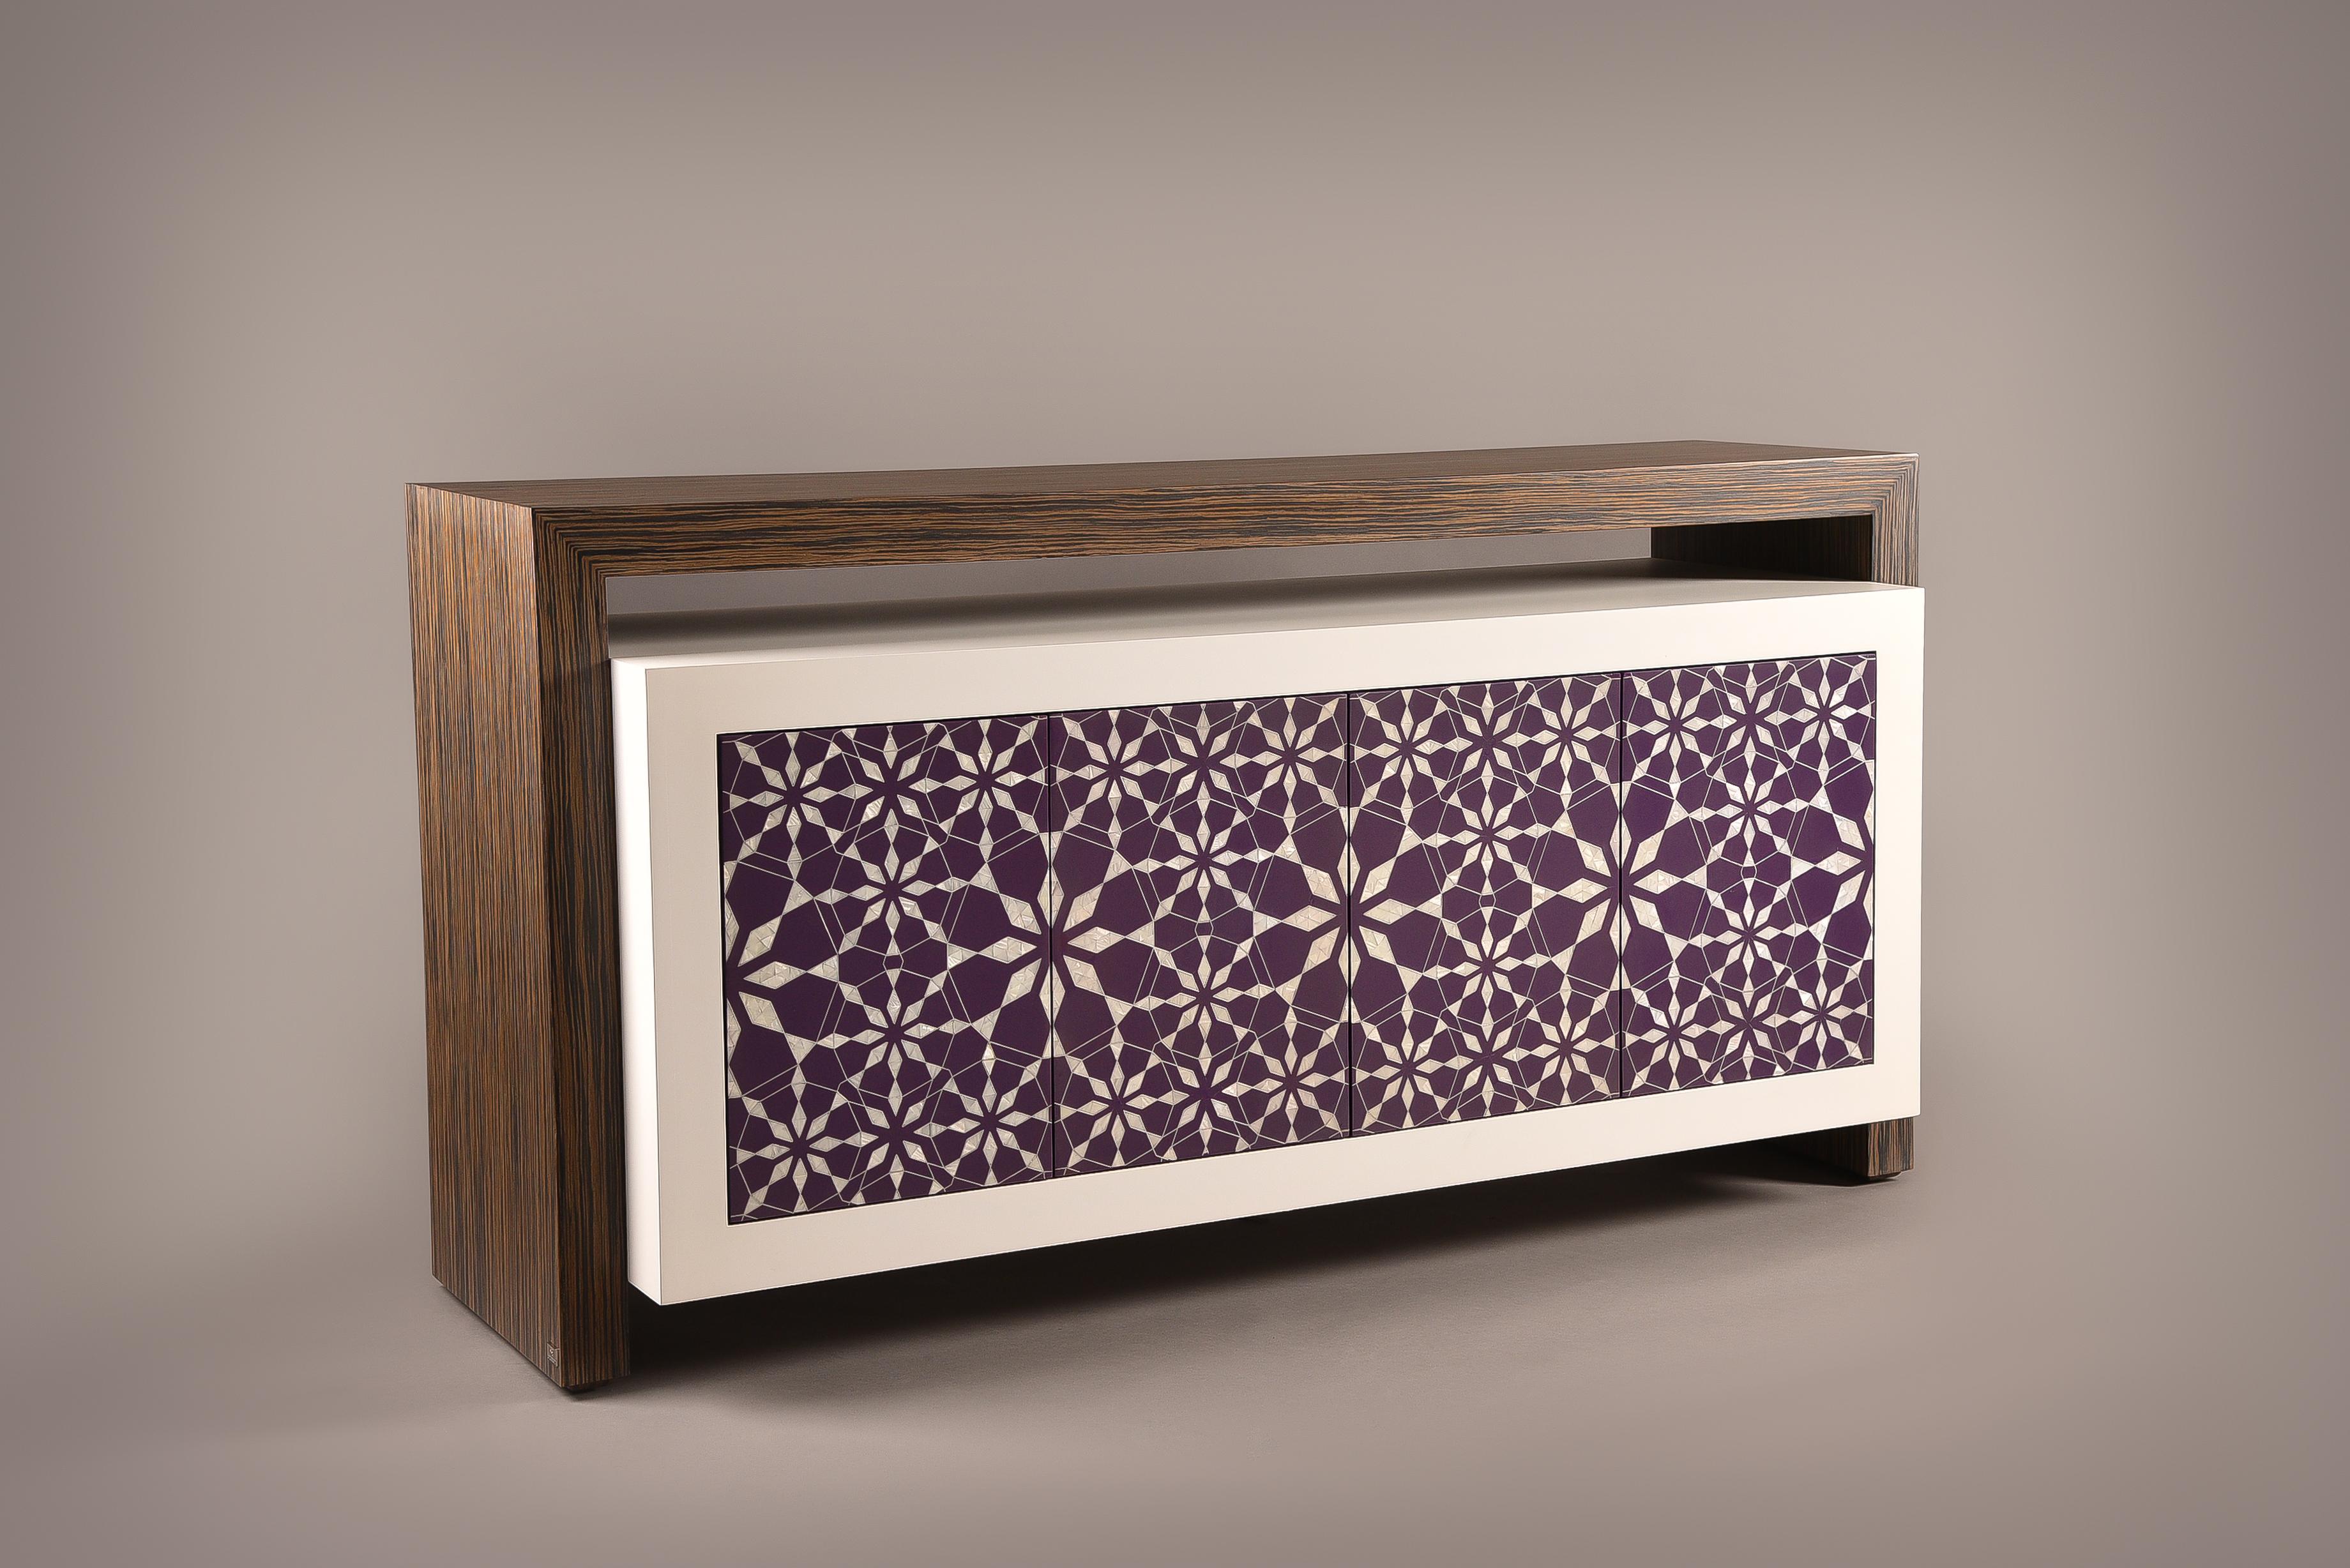 Harem is a sideboard that intercepts the classical Arabic patterns and handcrafted techniques with modern clean design lines. The four door unit cabinet in Ebony wood frame and colored cabinet is hand-inlaid with mother-of-pearl and